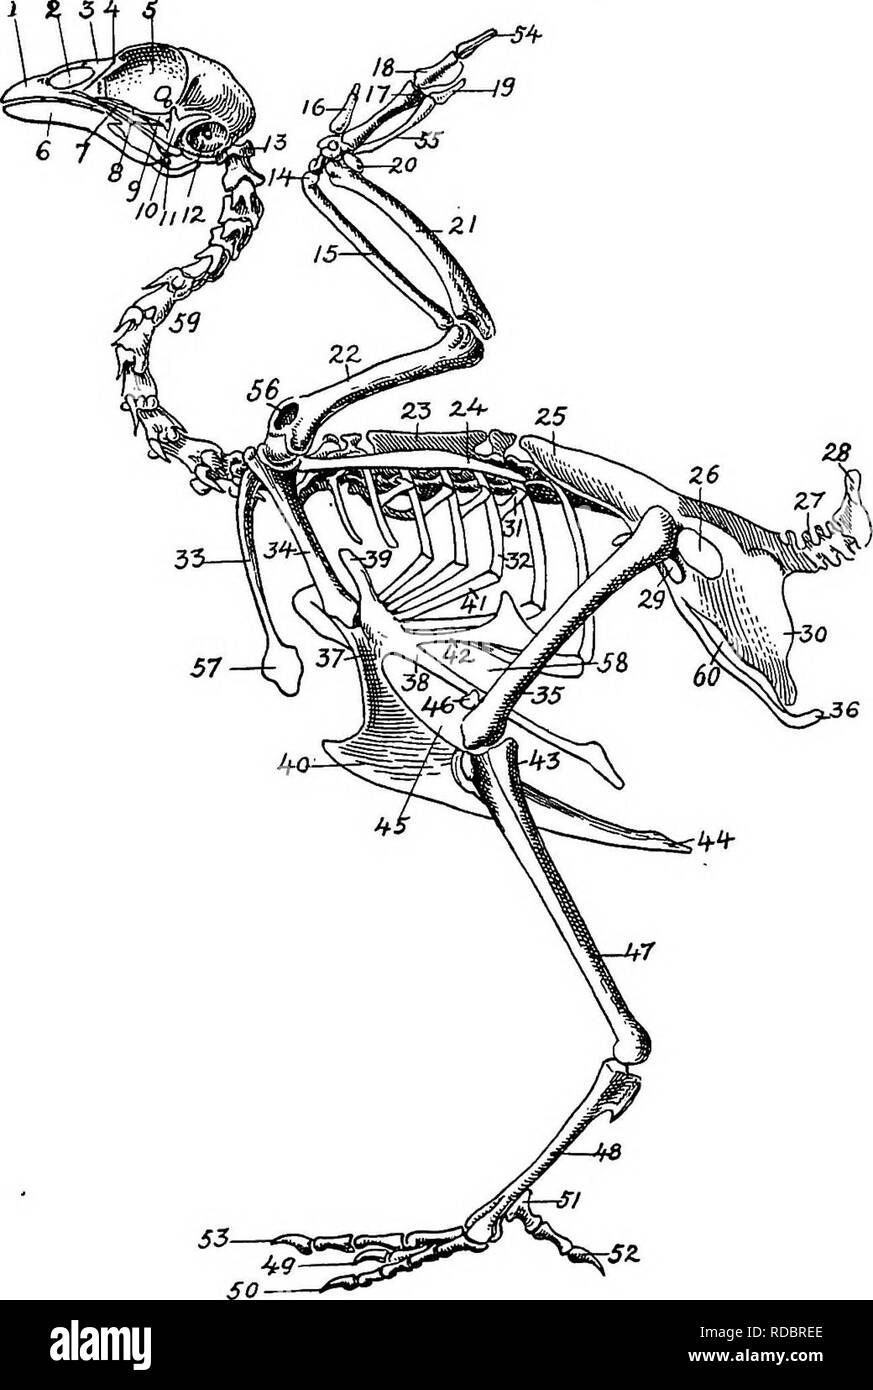 . The anatomy of the domestic fowl . Domestic animals; Veterinary medicine; Poultry. 24 ANATOMY OF THE DOMESTIC FOWL. Pig. 4.—The skeleton of the domestic fowl, i, Os incisivum. 2, External nasal opening. 3, Os nasale. 4, Os lachrymale. 5, Lamina perpendicularis. 6, Os dentale. 7, Os palatine. 8, Os quadrato-jugal. 9, Os pterygoideum. 10, Os quadratum. 11, Os articulare. 12, External auditory canal. 13, Atlas. 14, Os carpi radiale. 15, Radius. 16, First finger. 17, Os metacarpus. 18, Second finger. 19, Third finger. 20, Os carpi ulnare. 21, Ulna. 22, Humerus. 23, Thoracic vertebras. 24, Scapul Stock Photo